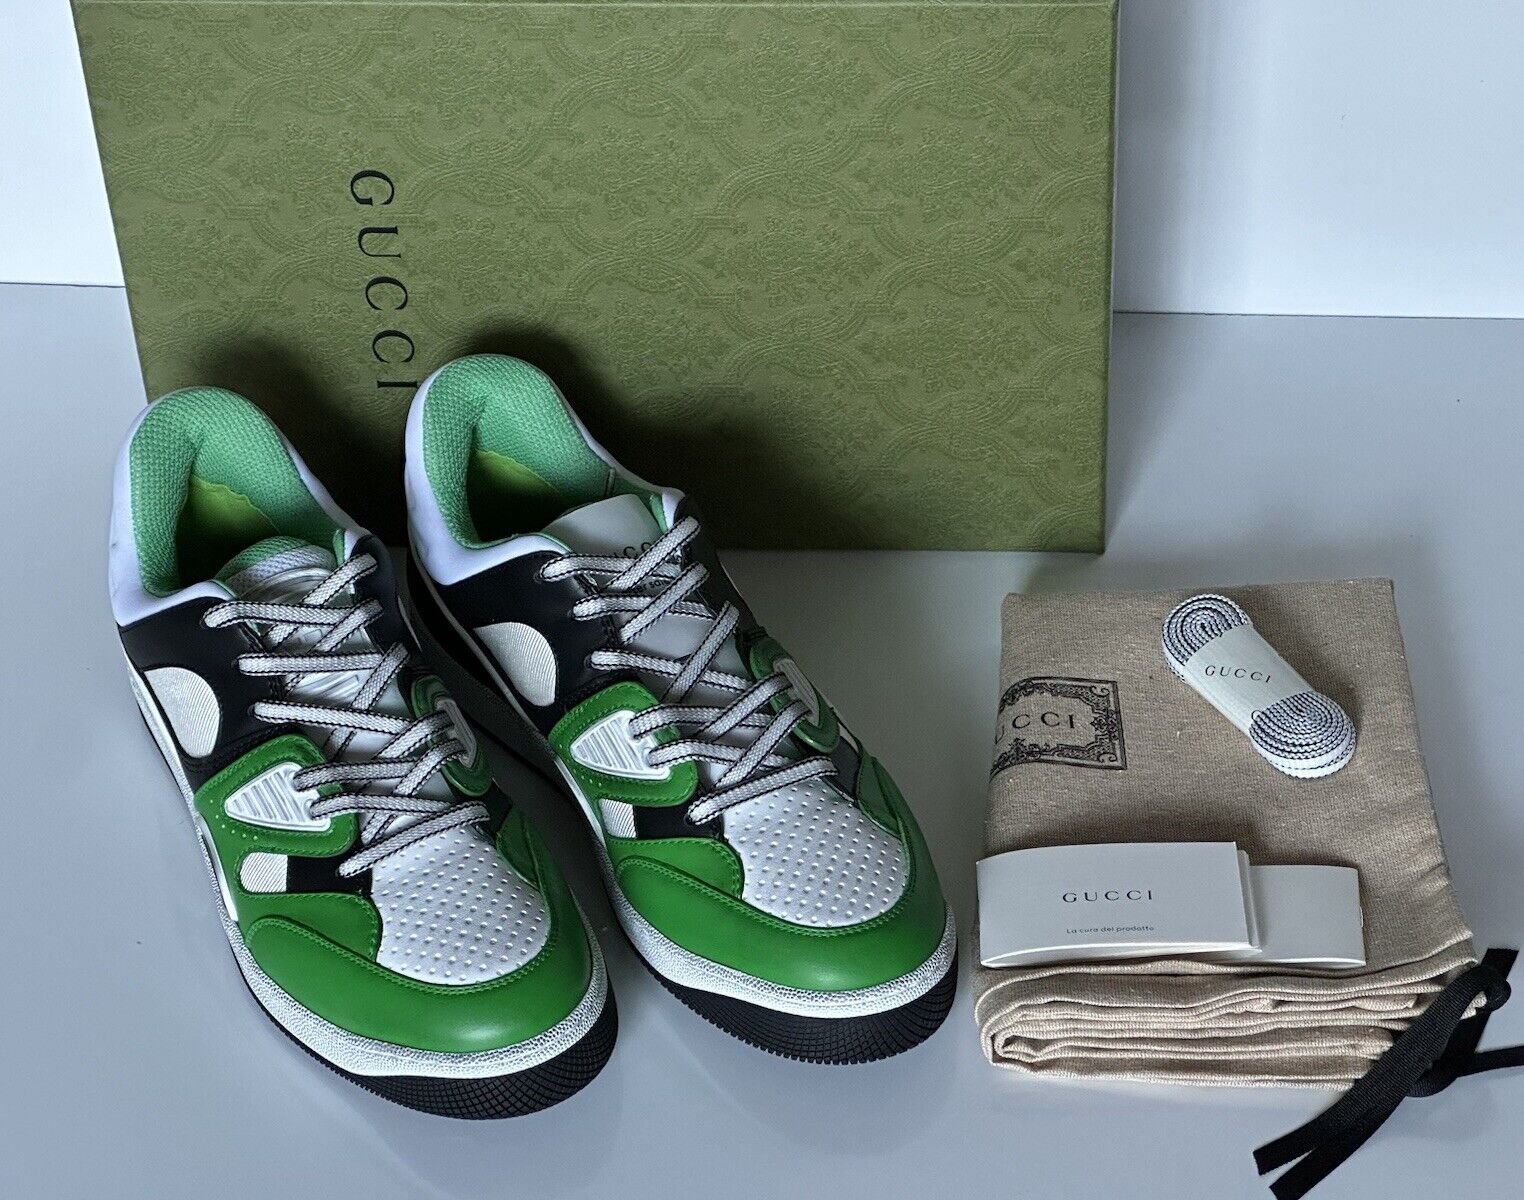 NIB Gucci Men's Low-top White/Green Leather Sneakers 10.5 US (Gucci 10G) 697882